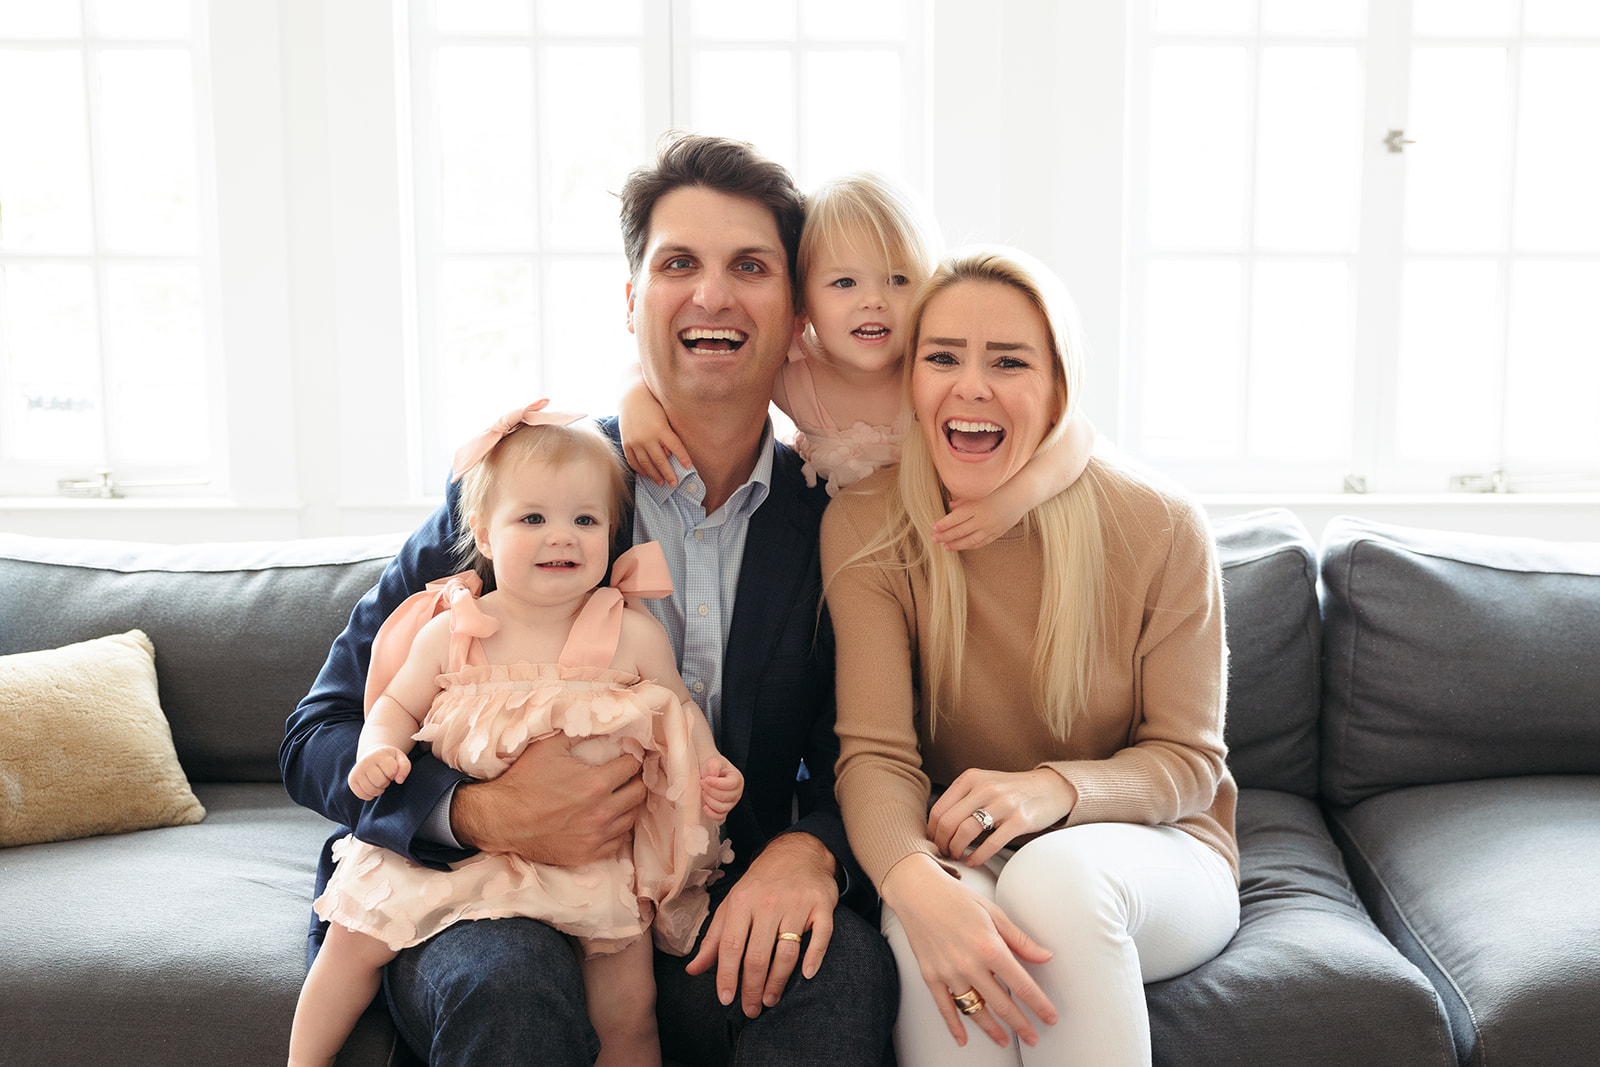 A beautiful family of four with two daughters who did a photoshoot in their San Francisco home to celebrate a birthday.